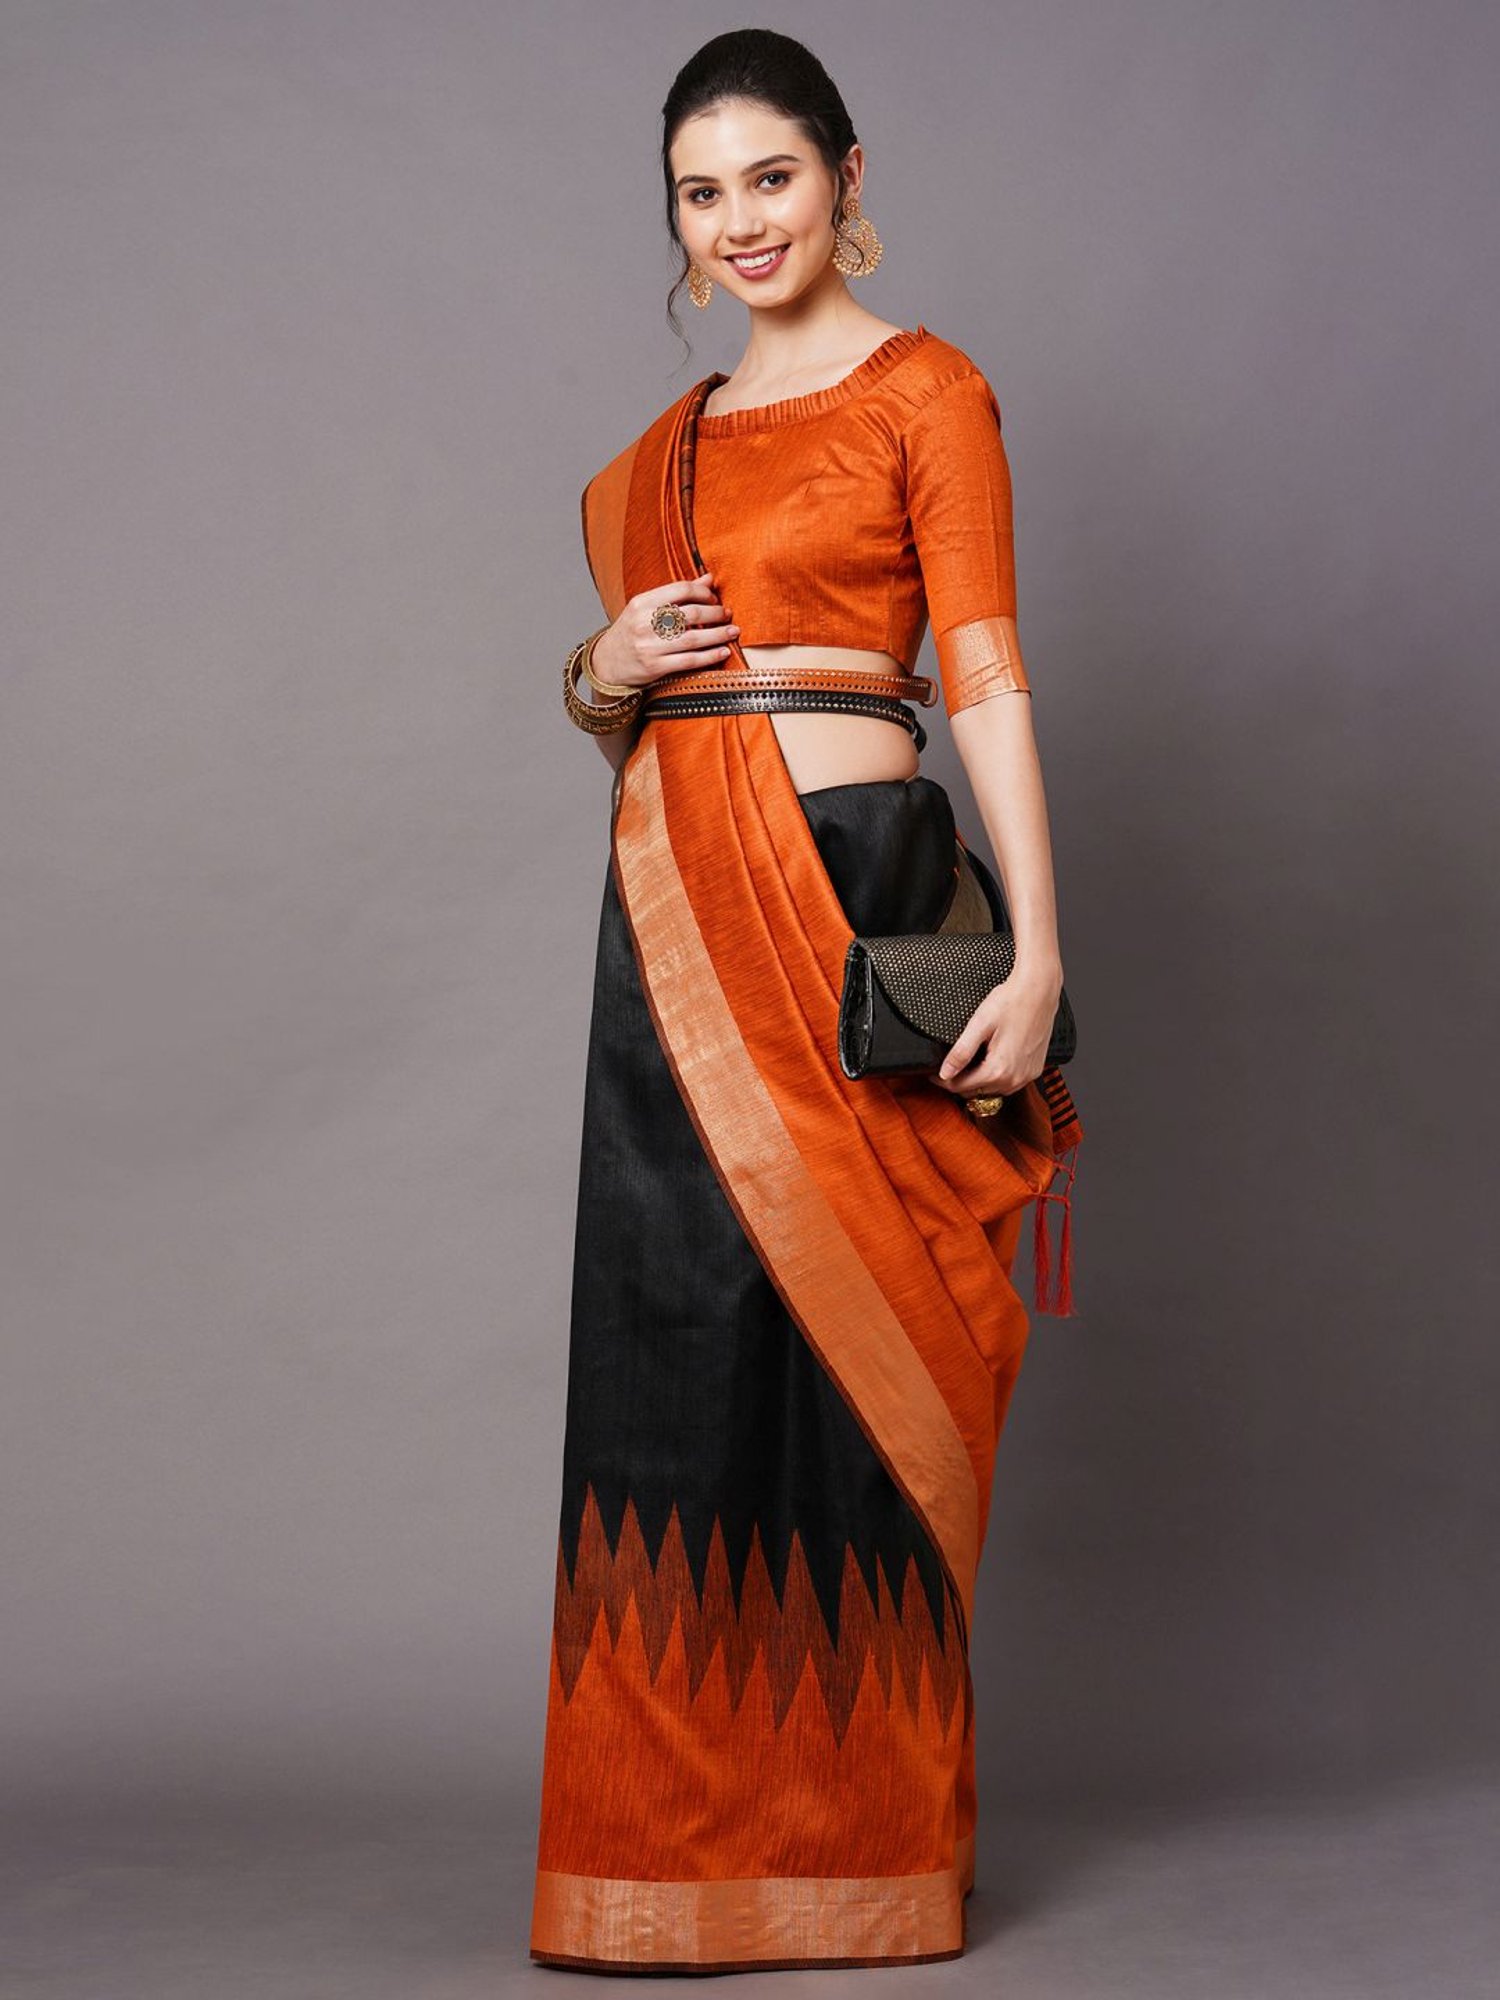 Buy Peach Best Seller Sleeveless Plus Size Sarees Online for Women in USA